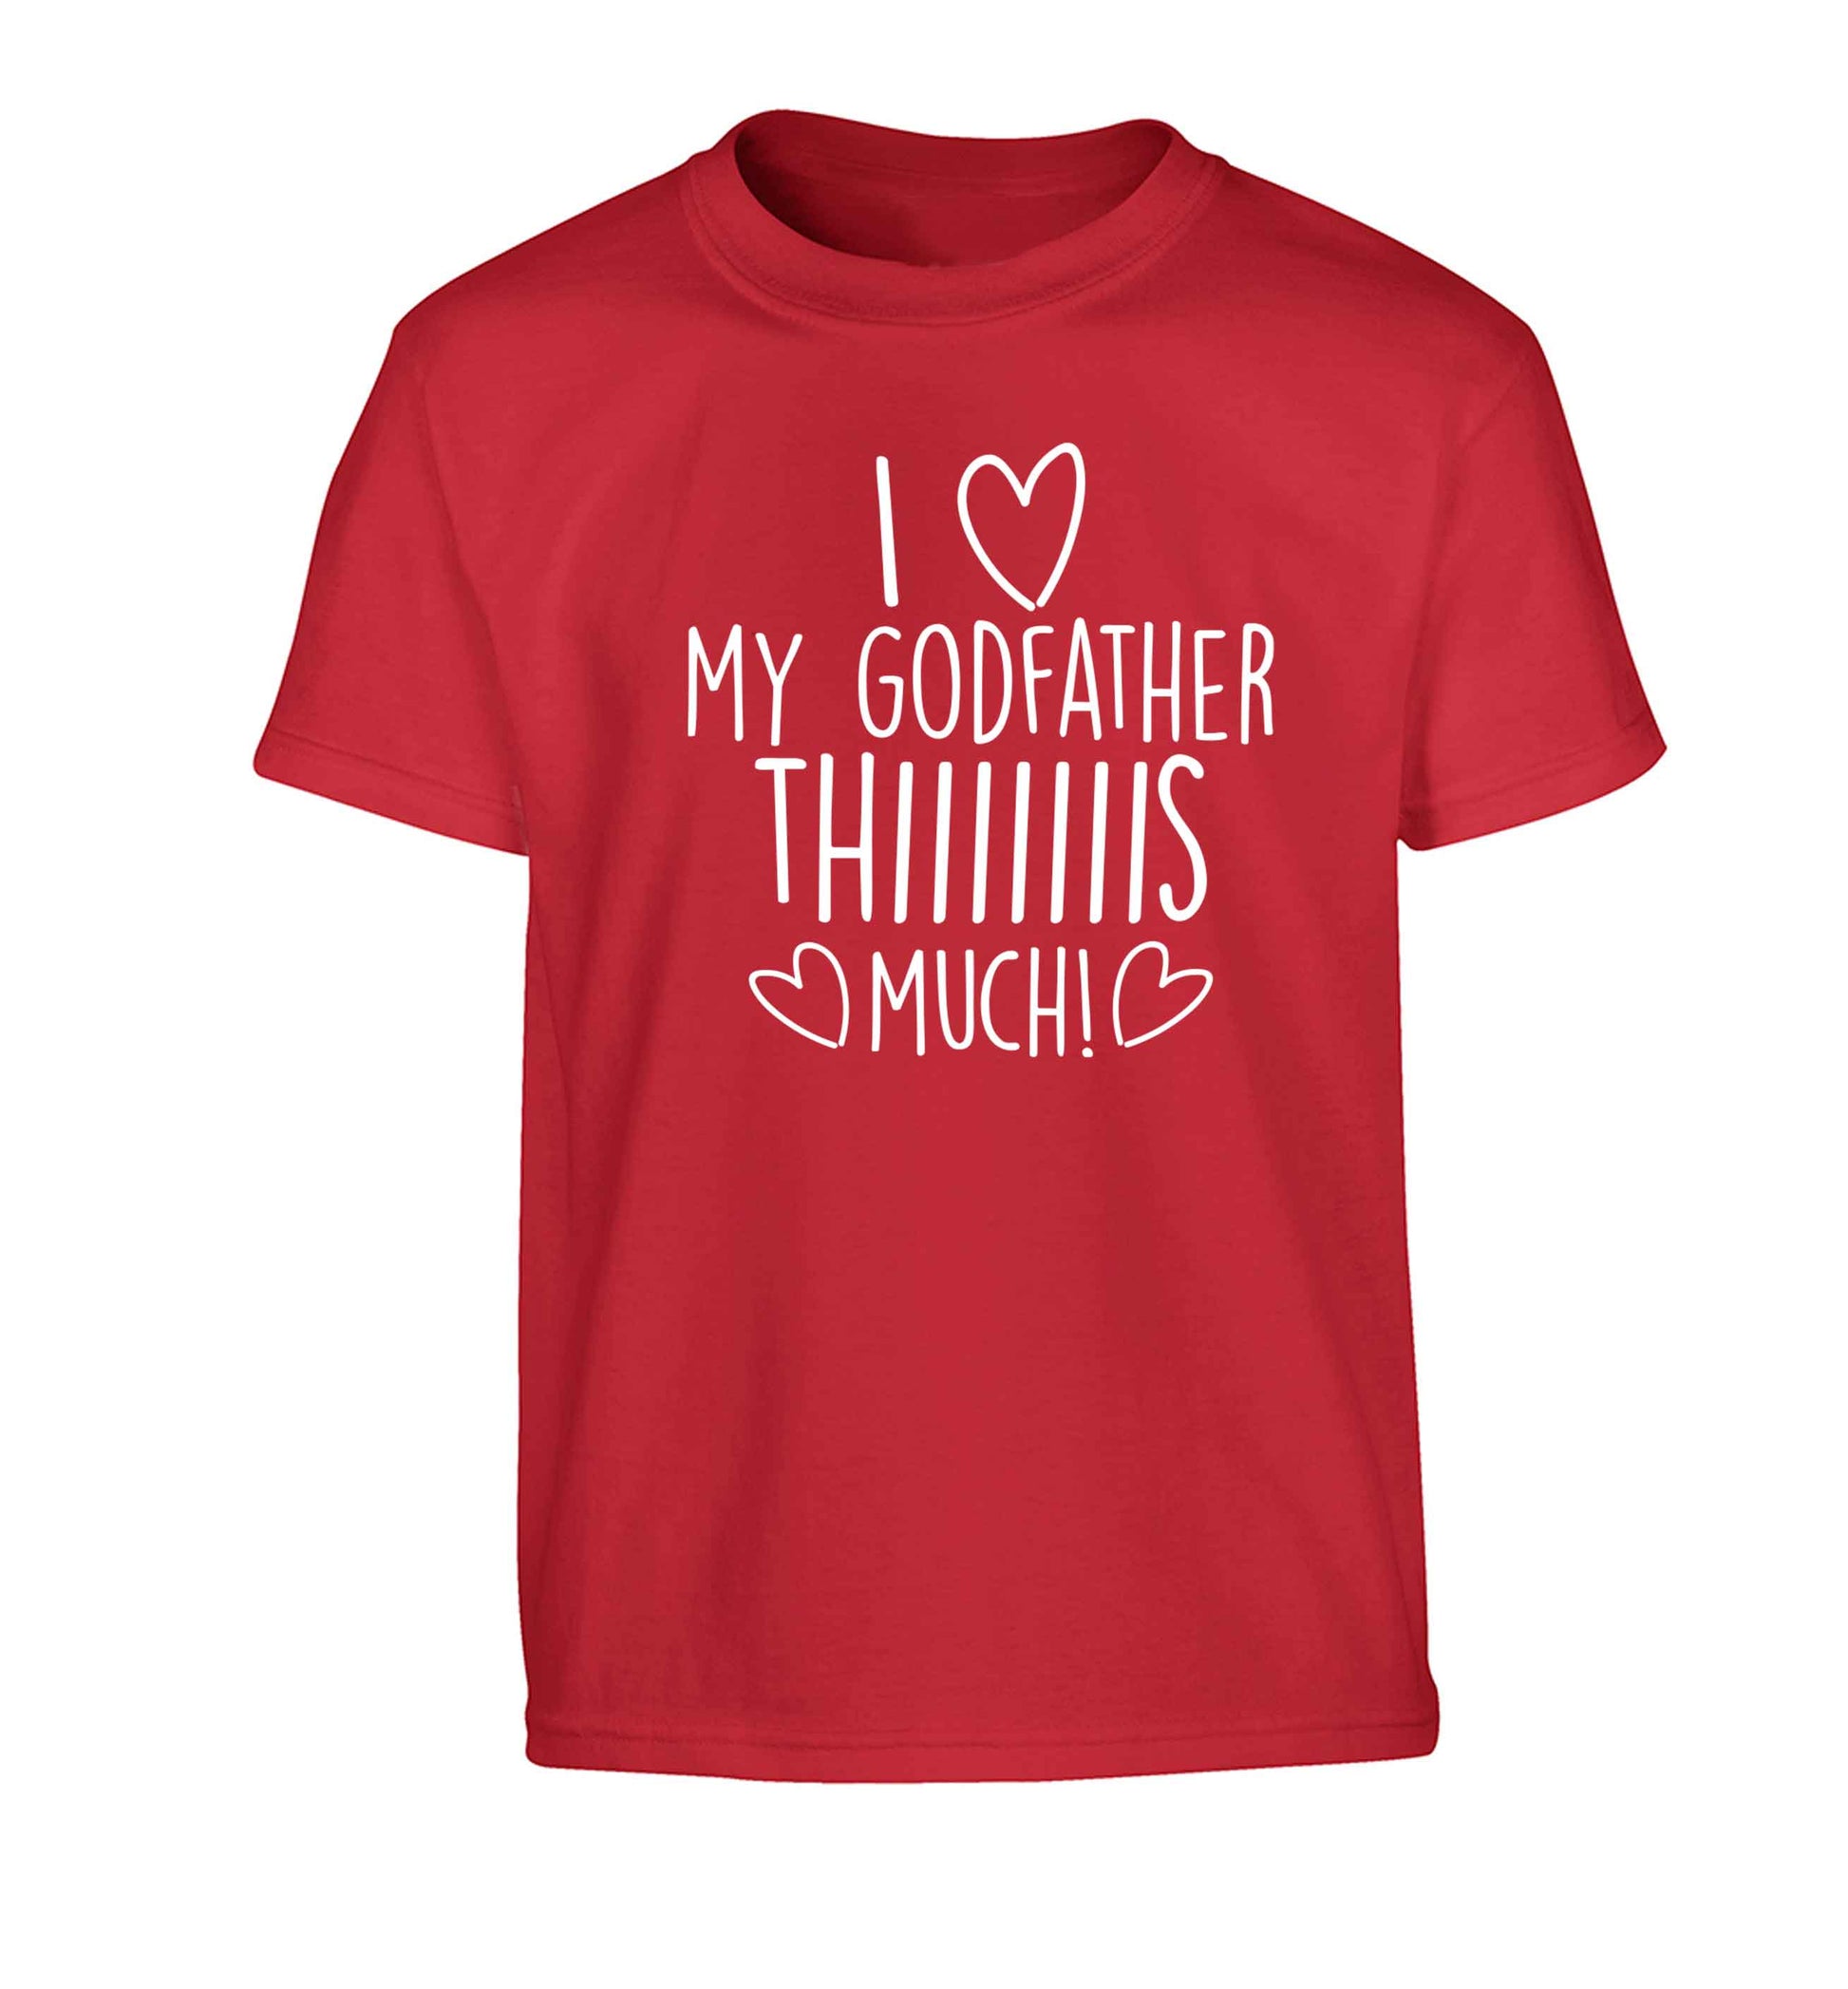 I love my Godfather this much Children's red Tshirt 12-13 Years